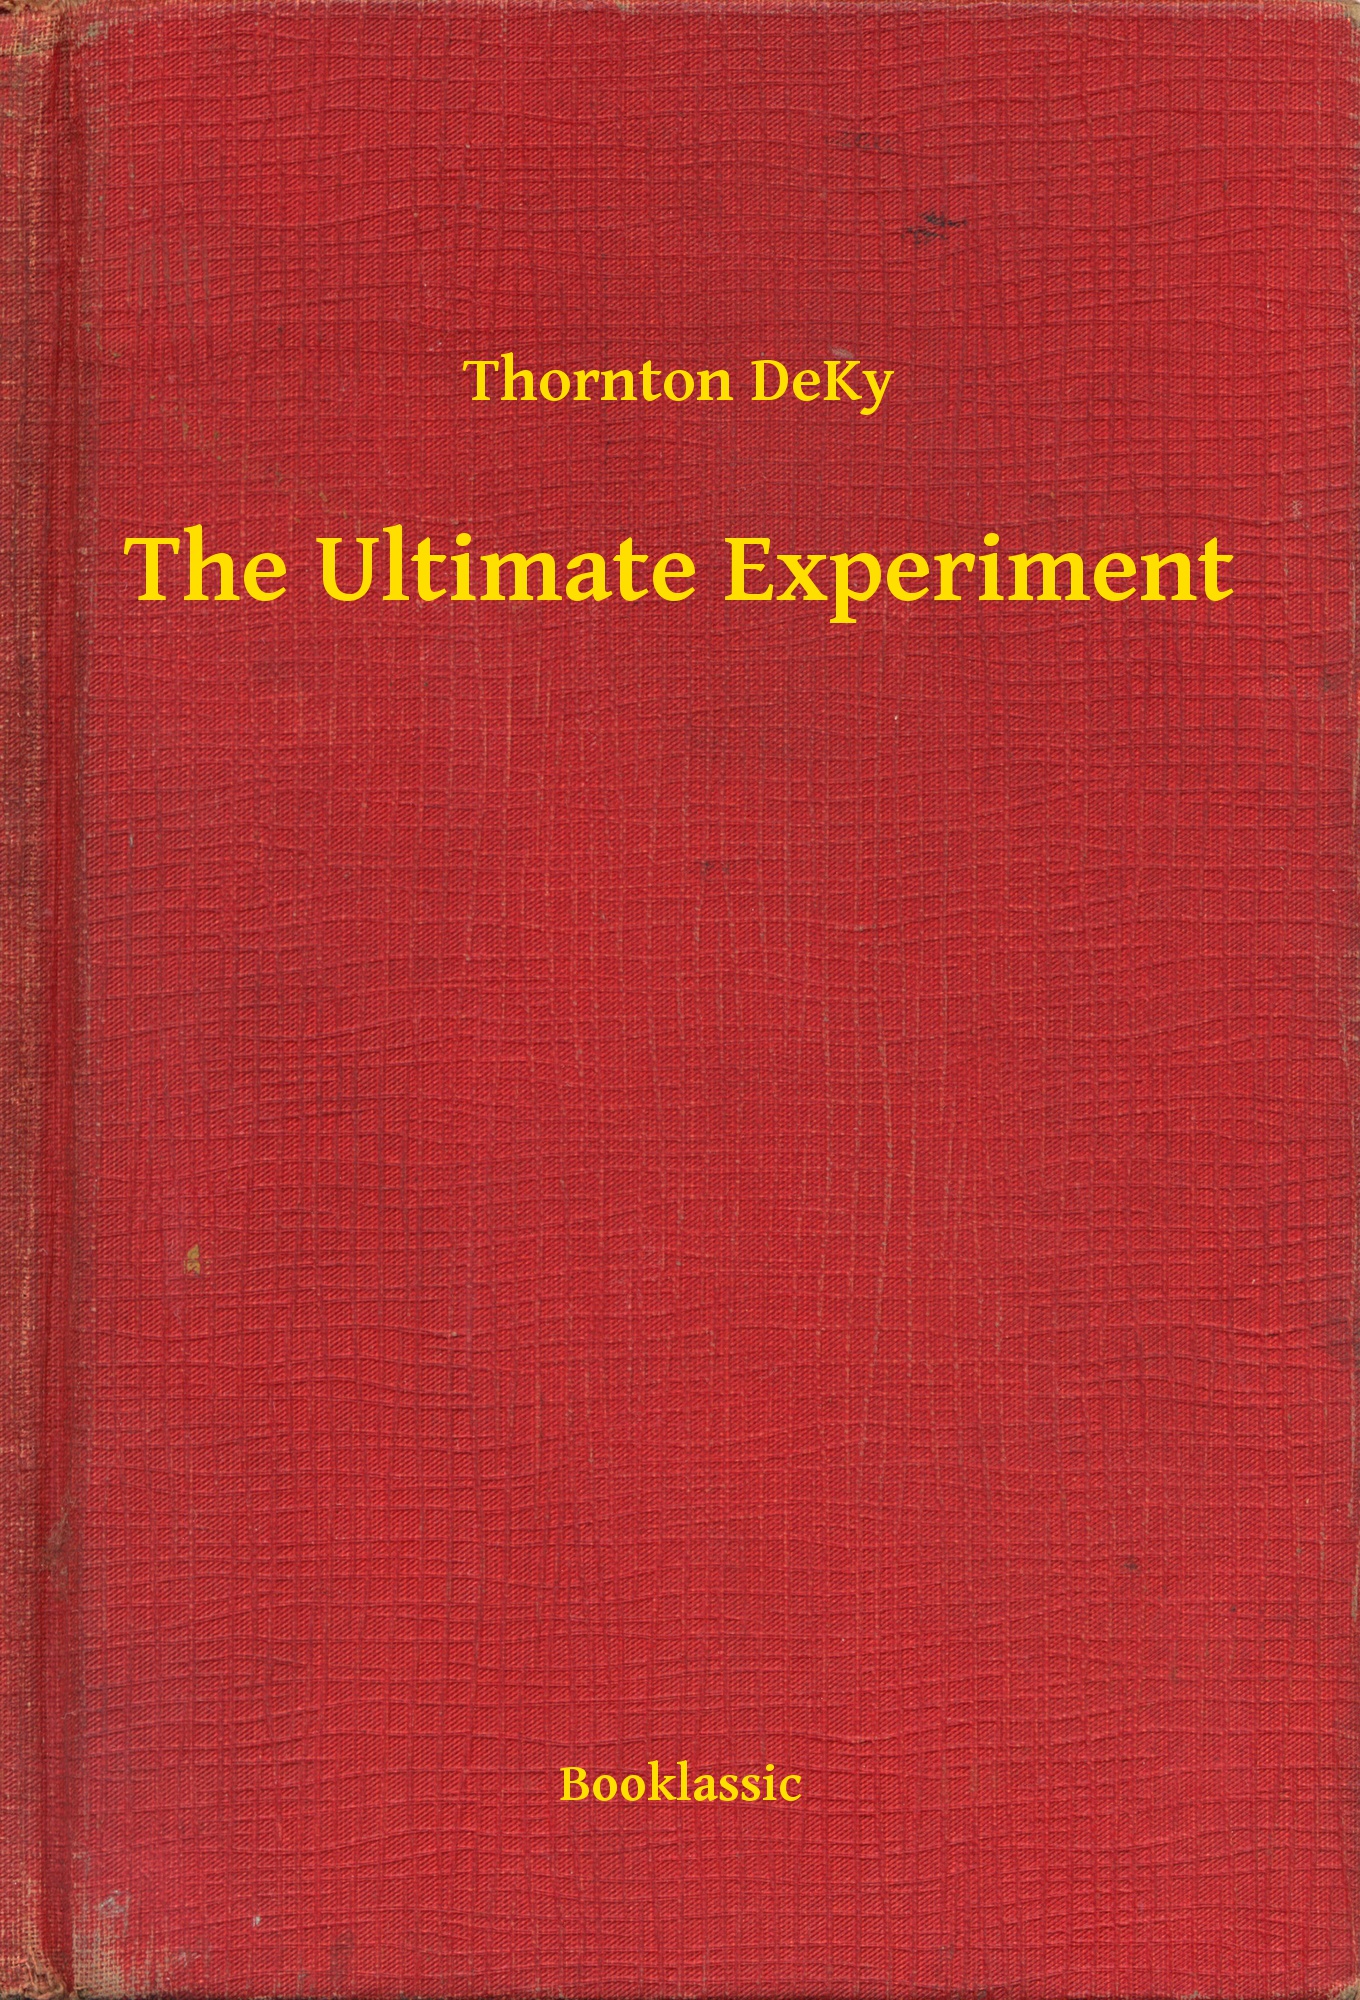 The Ultimate Experiment